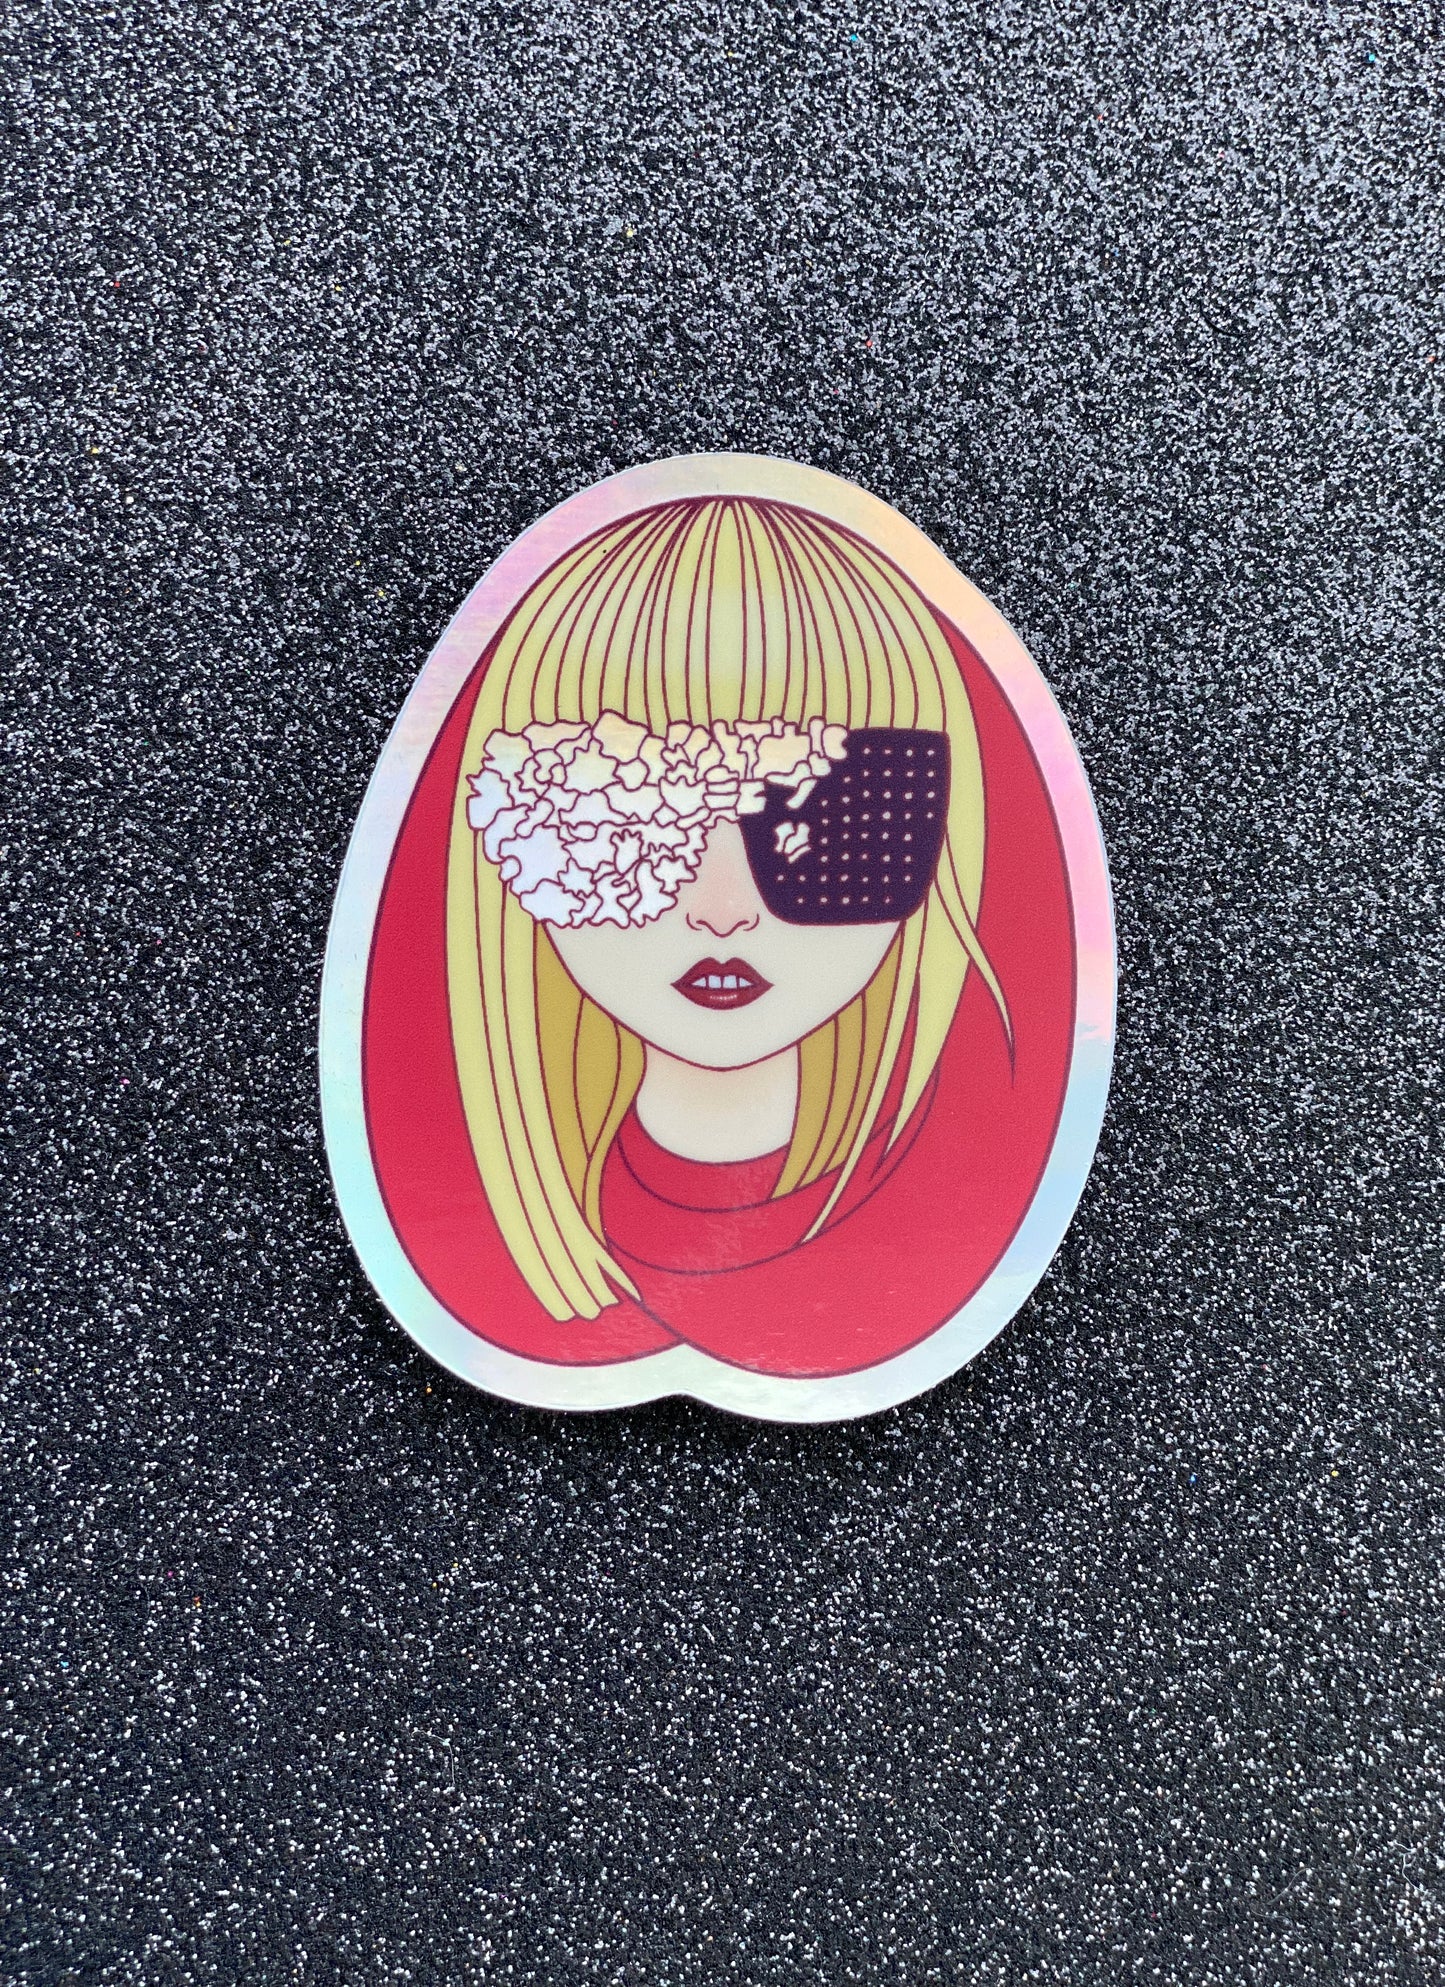 Illustrated sticker of Lady Gaga wearing a red hood and black and irridescent glasses against a black glitter background